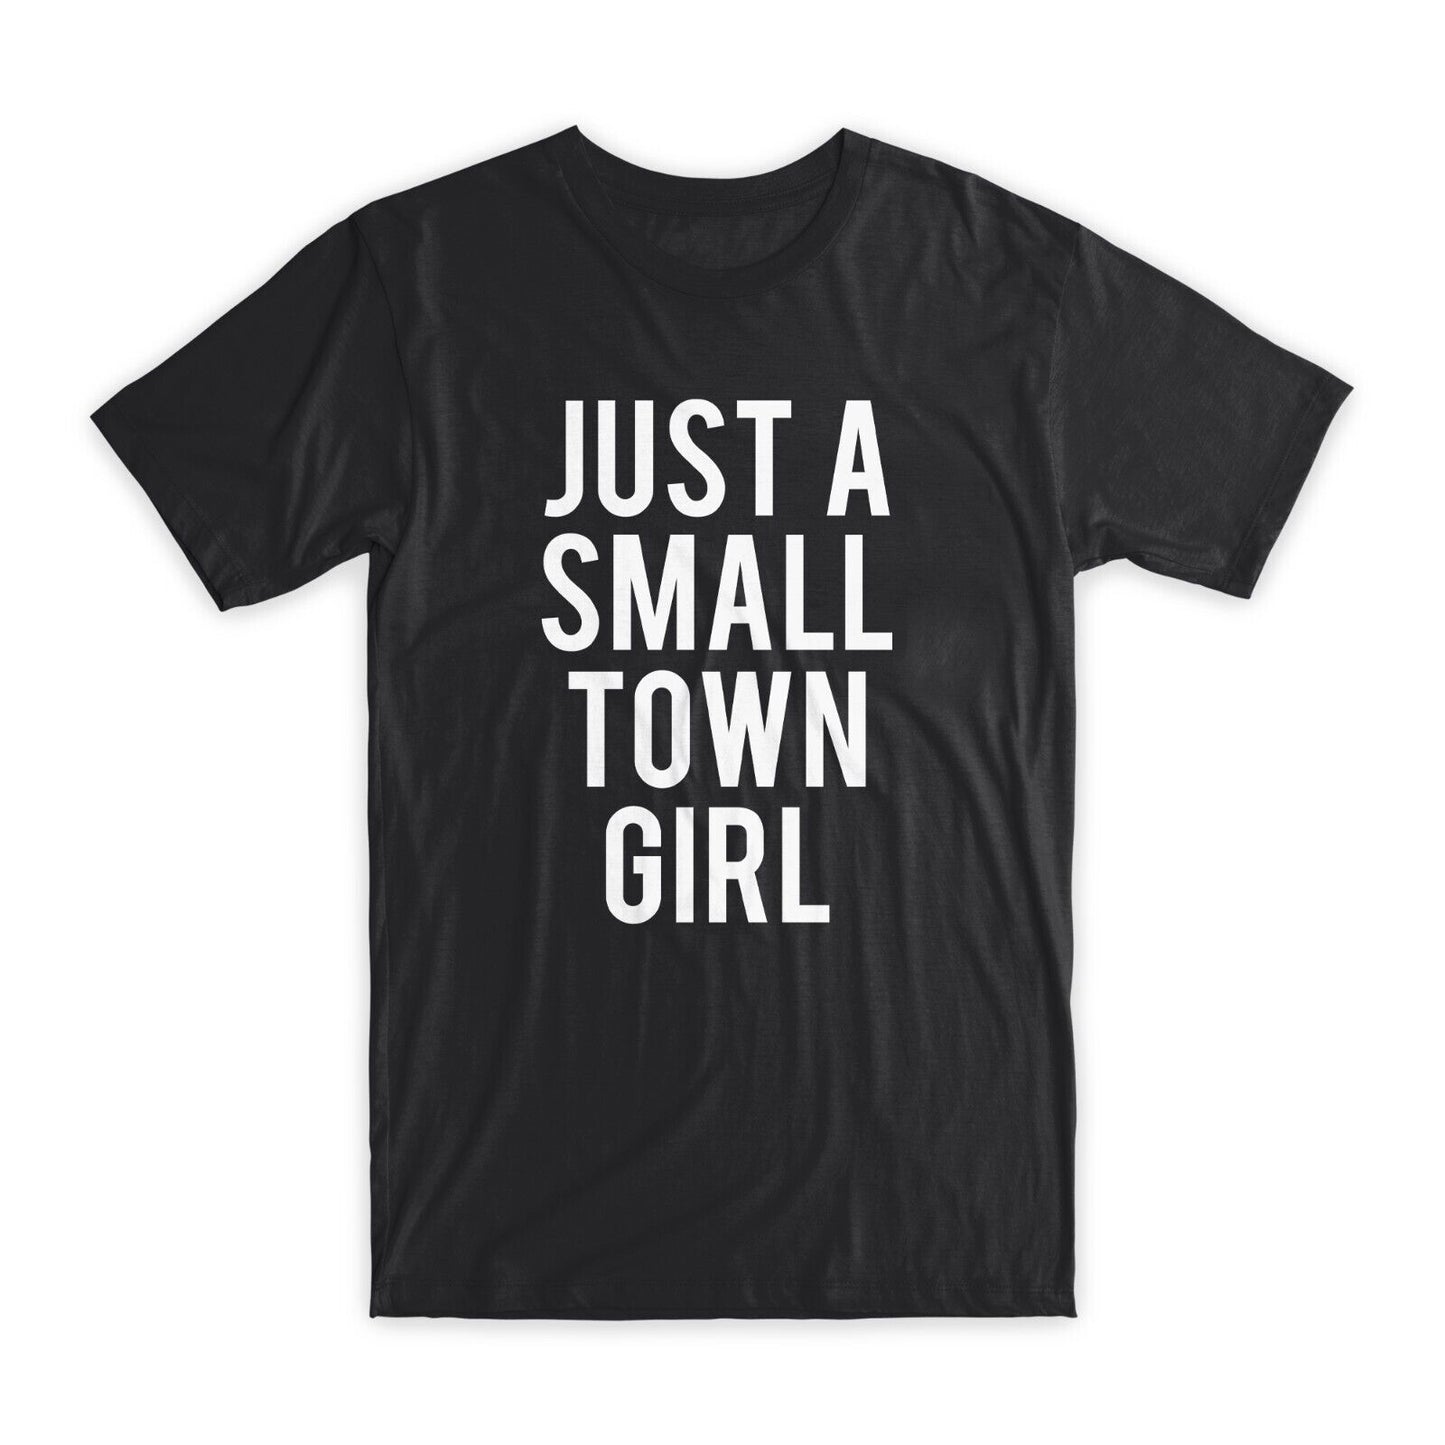 Just A Small Town Girl T-Shirt Premium Soft Cotton Crew Neck Funny Tee Gifts NEW